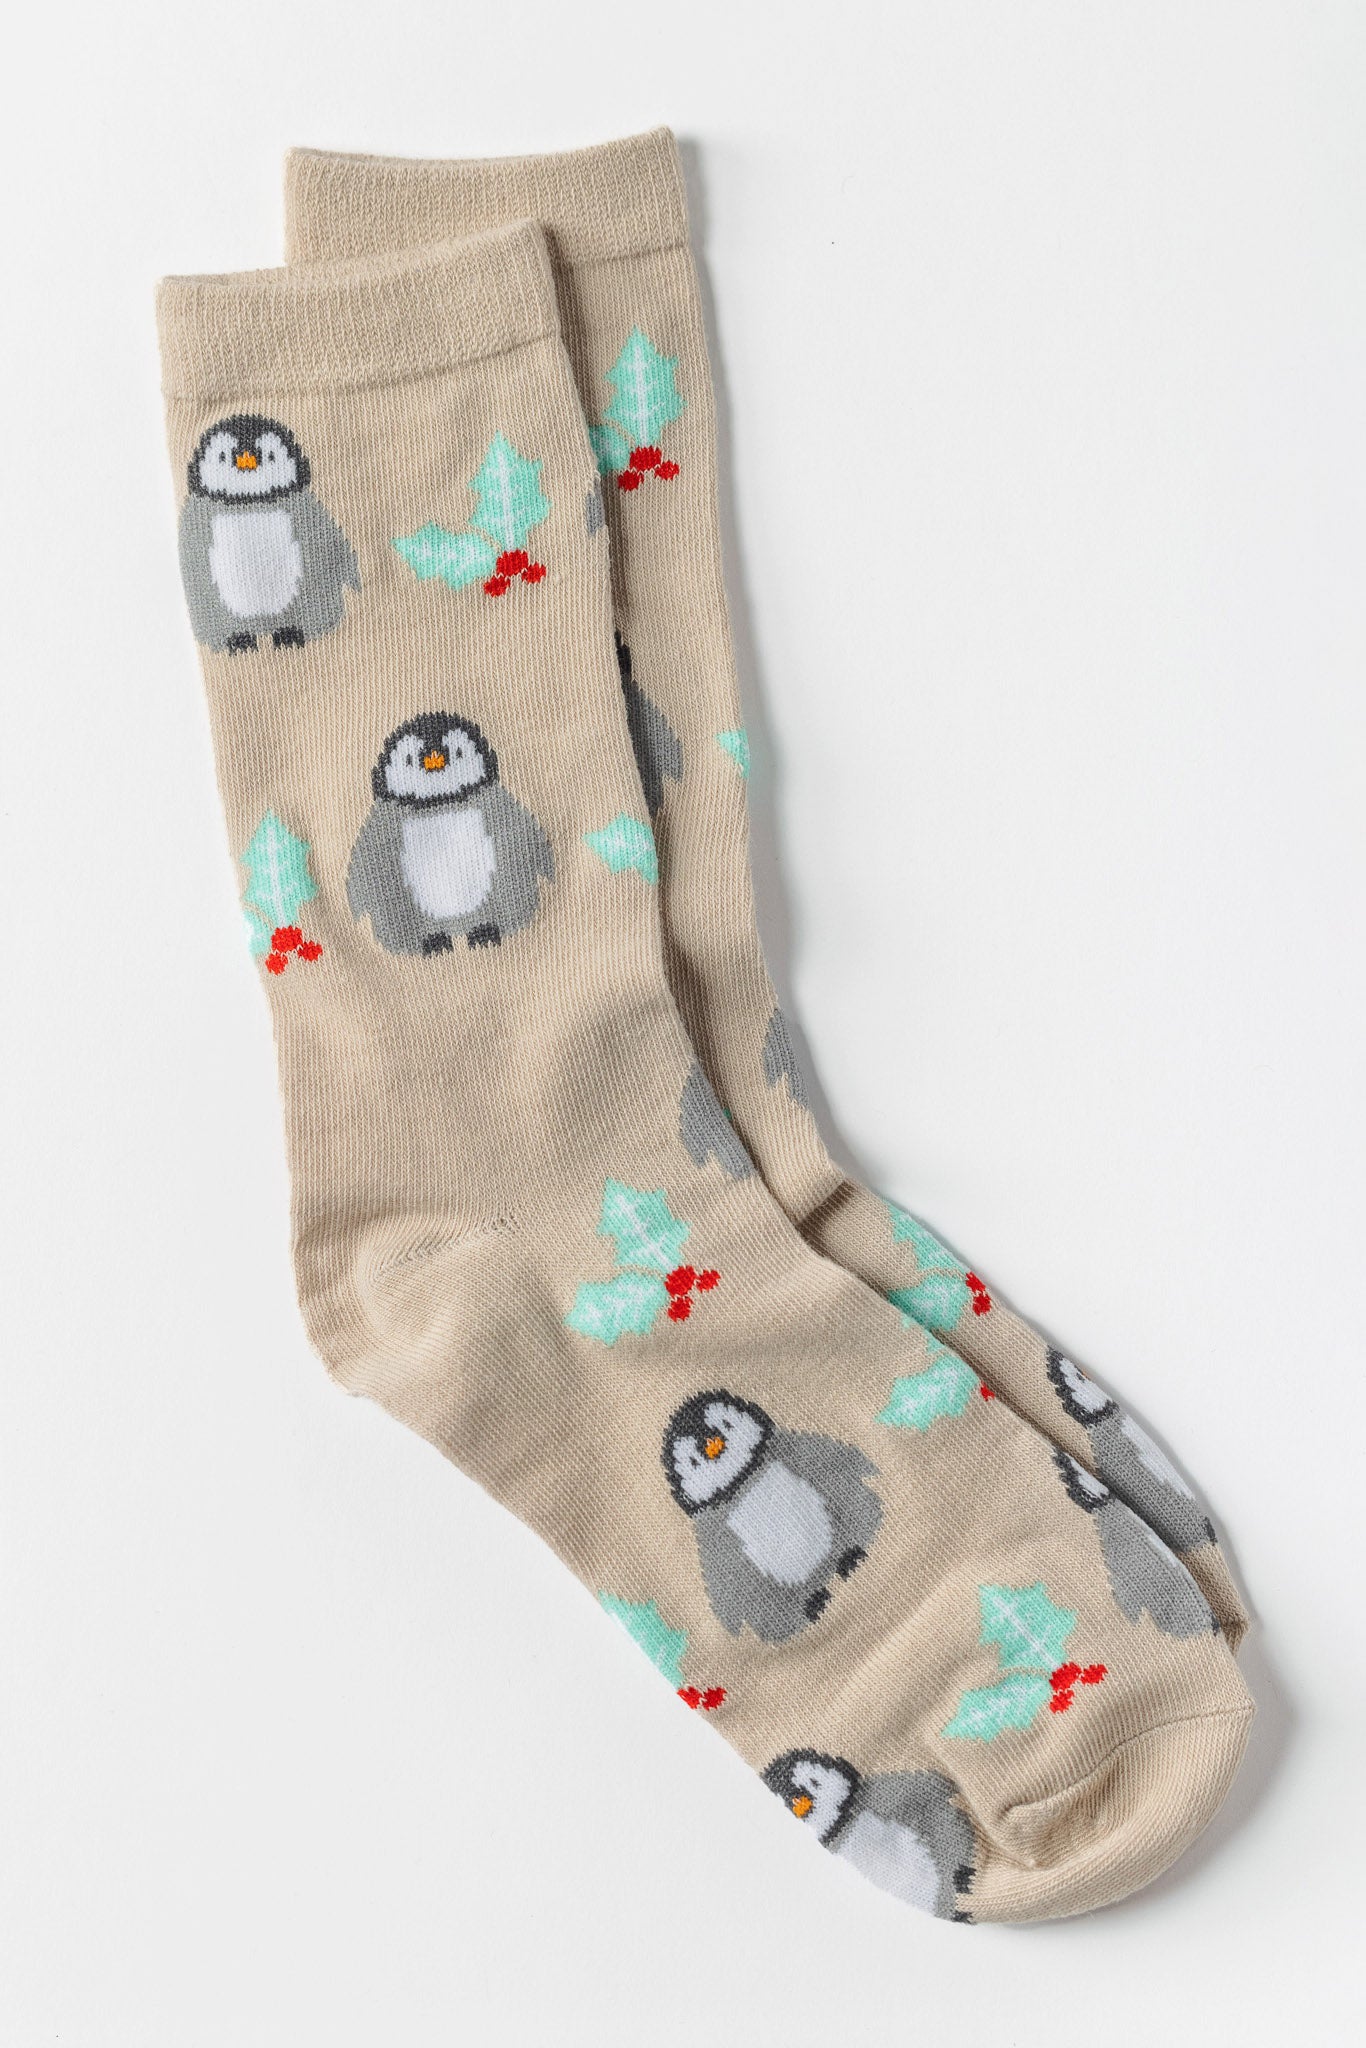 Penguin and Holly Socks